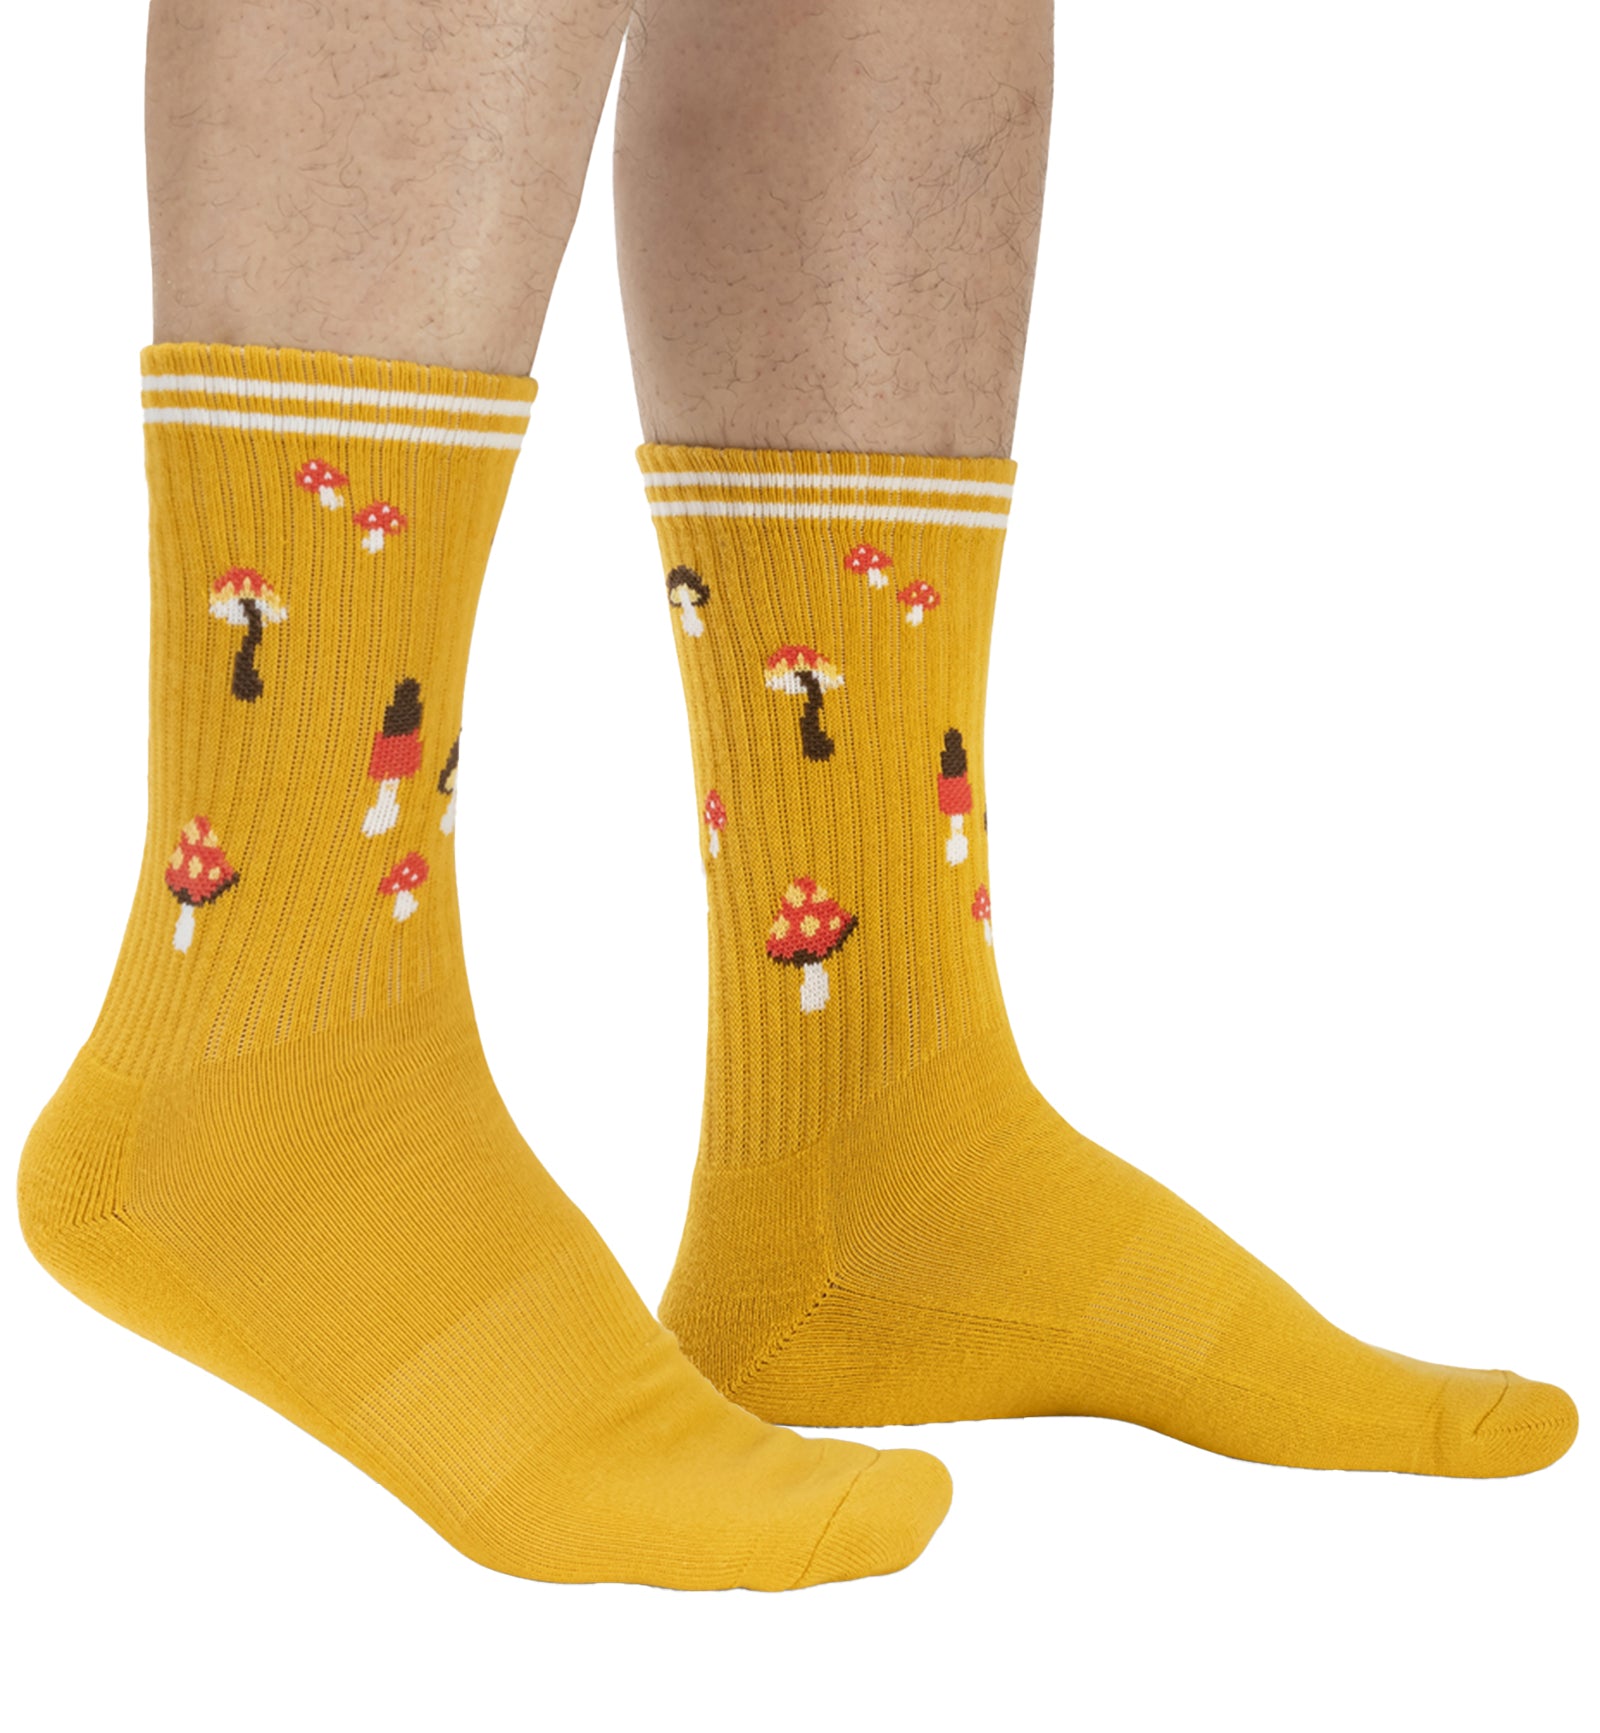 SOCK it to me Athletic Ribbed Crew Socks (R0012),Shrooms - Shrooms,One Size